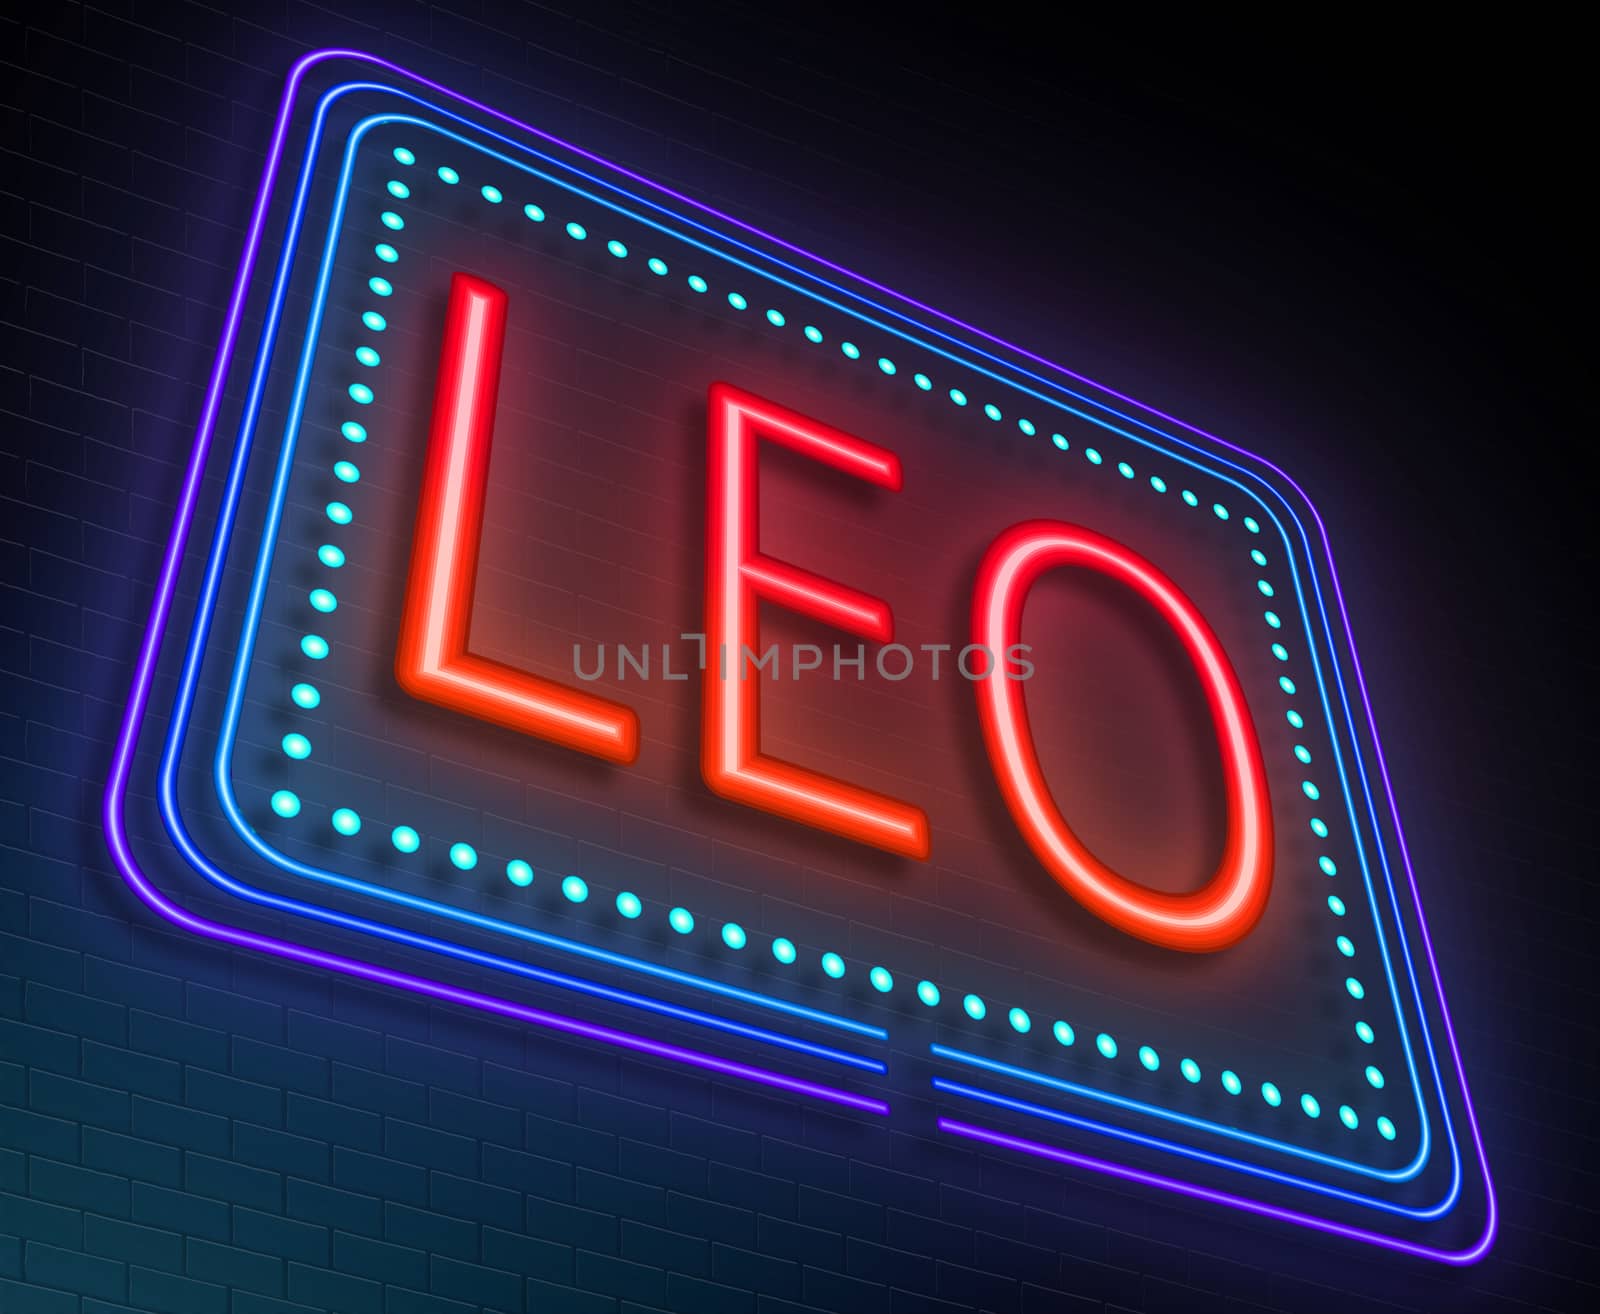 Illustration depicting an illuminated neon sign with a leo concept.